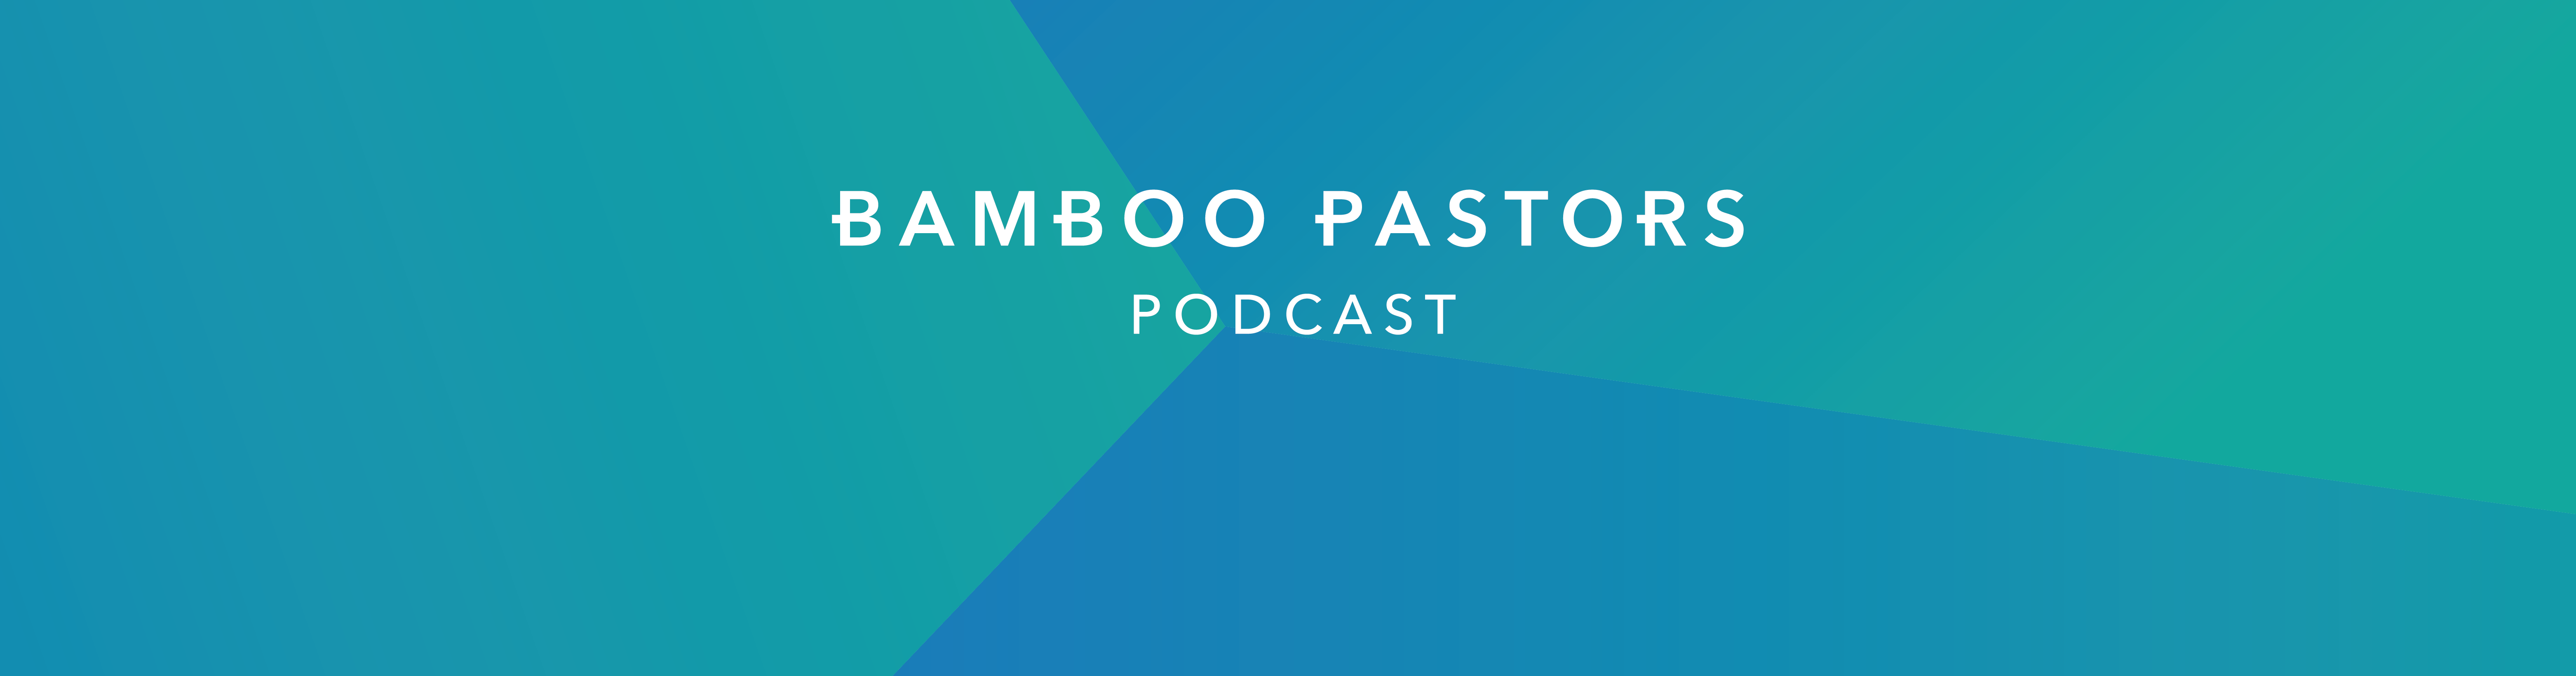 The Bamboo Pastors Podcast